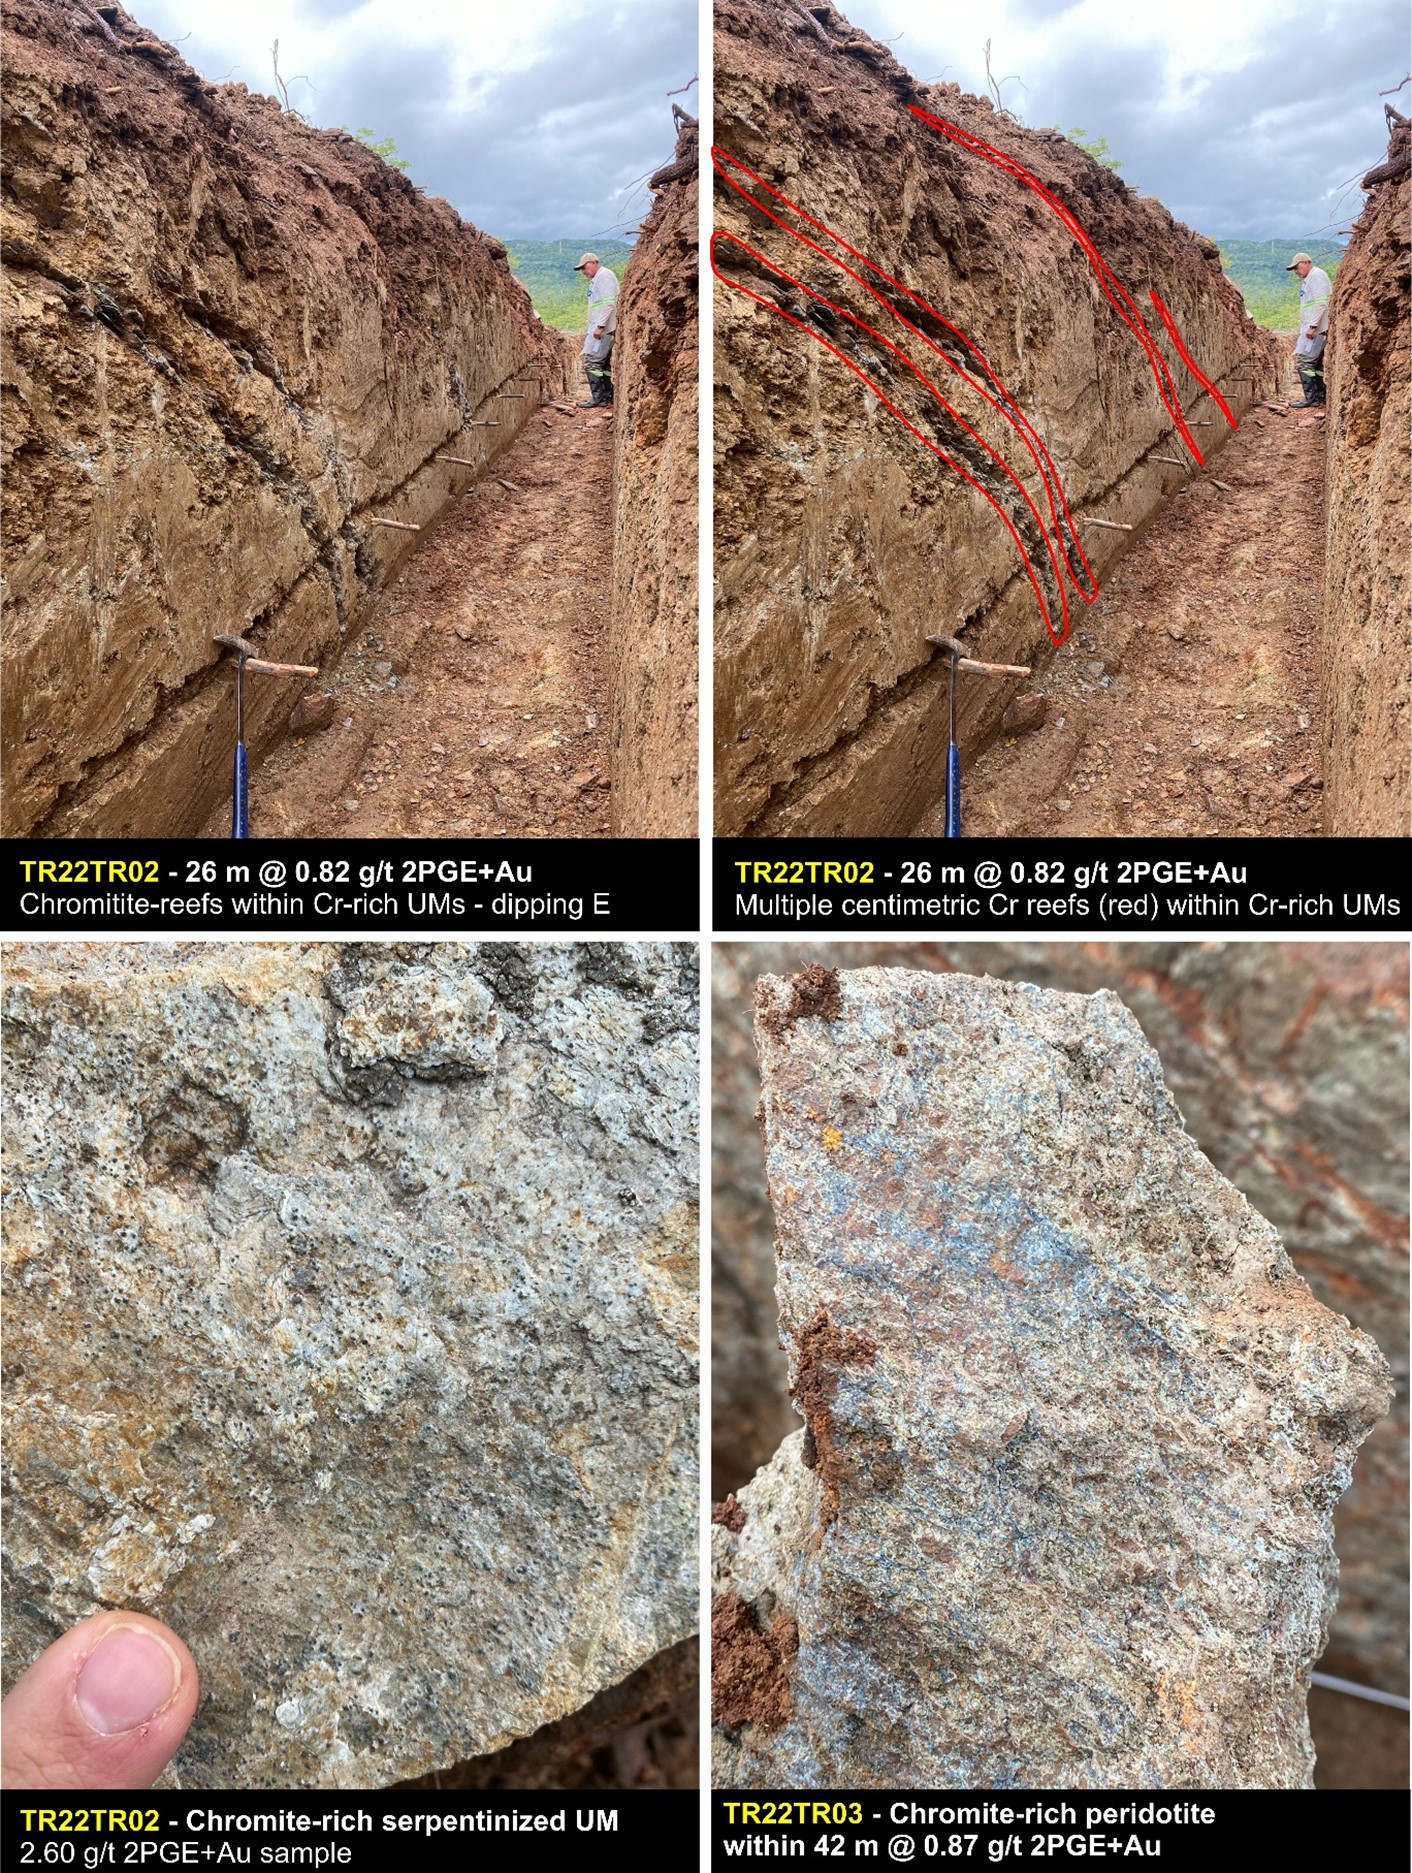 Figure 2: Photographs from trenching at the Tróia Target, highlighting chromitite reef horizons and chromite-rich ultramafics.